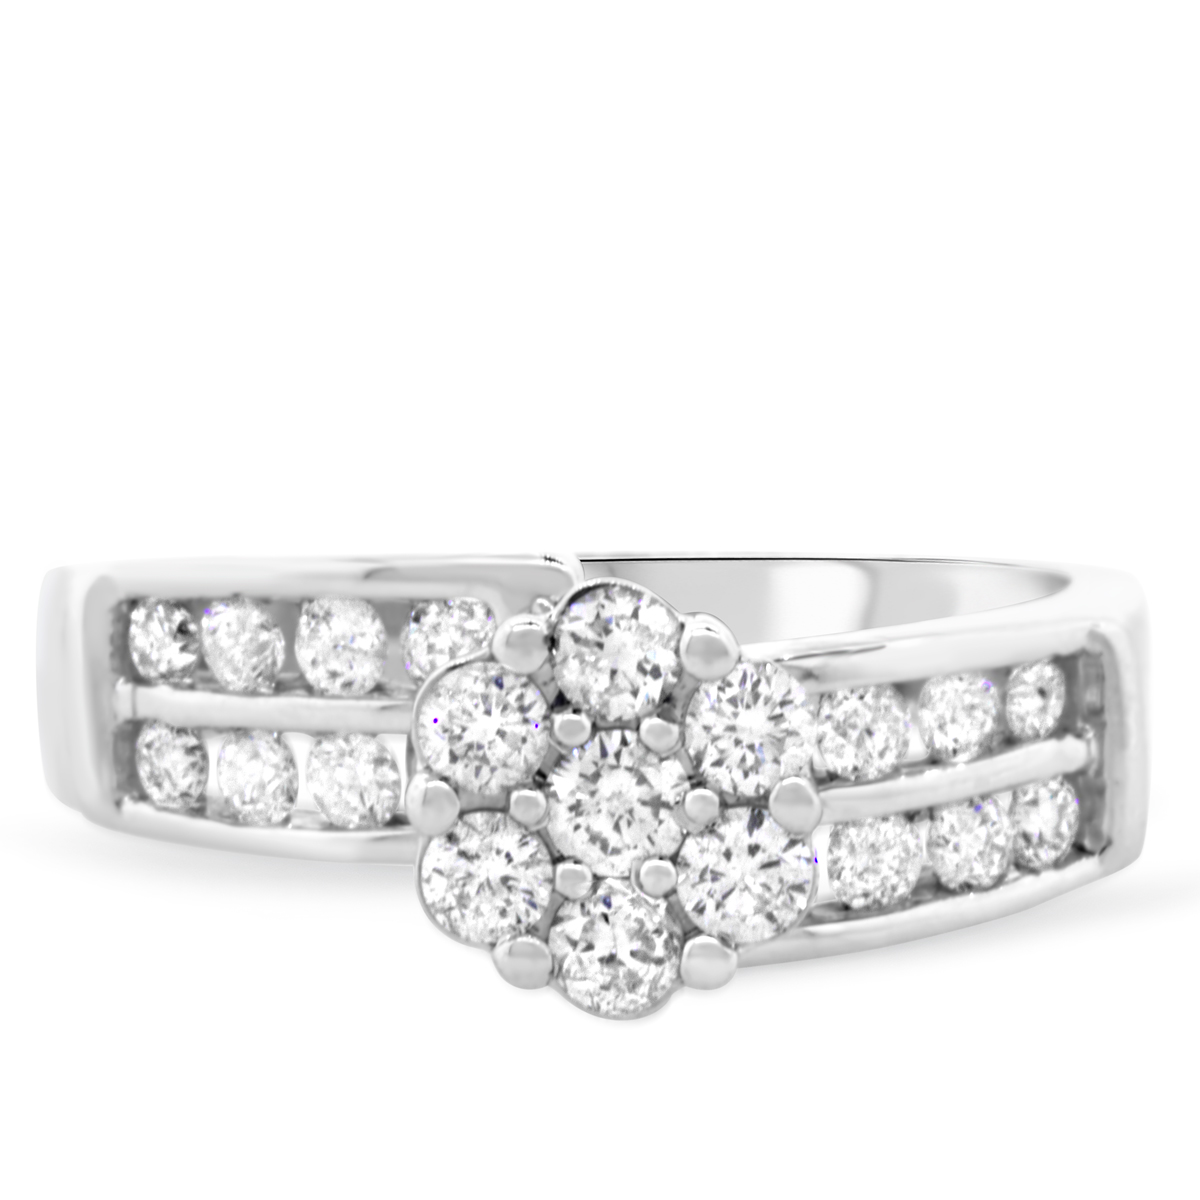 2 CT. T.W. Diamond Three Flower Ring in 14K White Gold | Zales Outlet